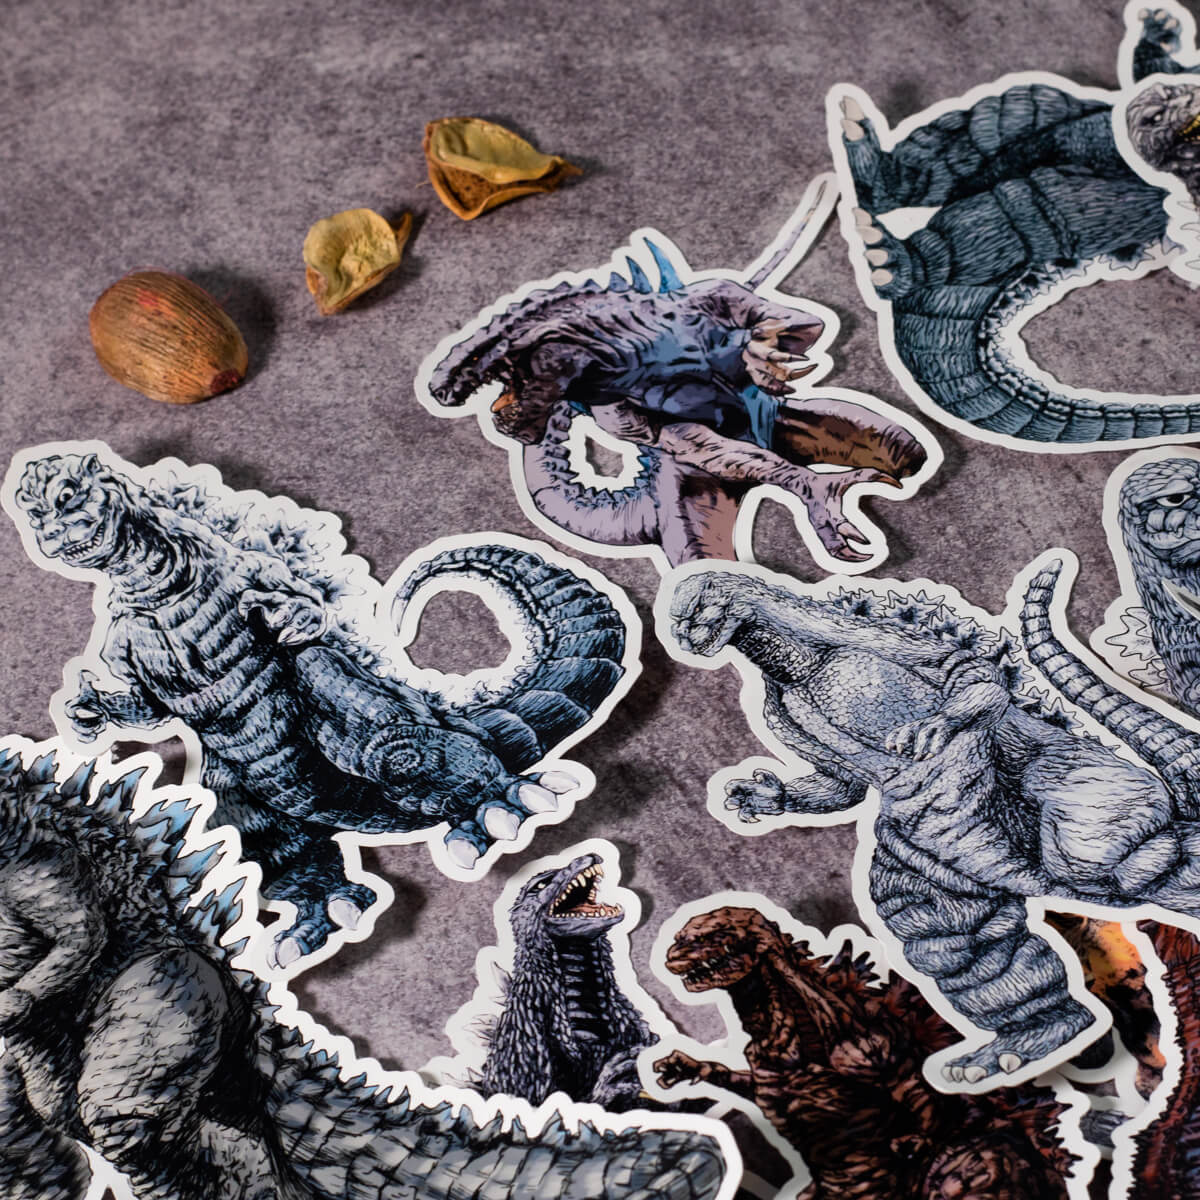 Godzilla Monster Themed Set of 37 Assorted Stickers Decal Set